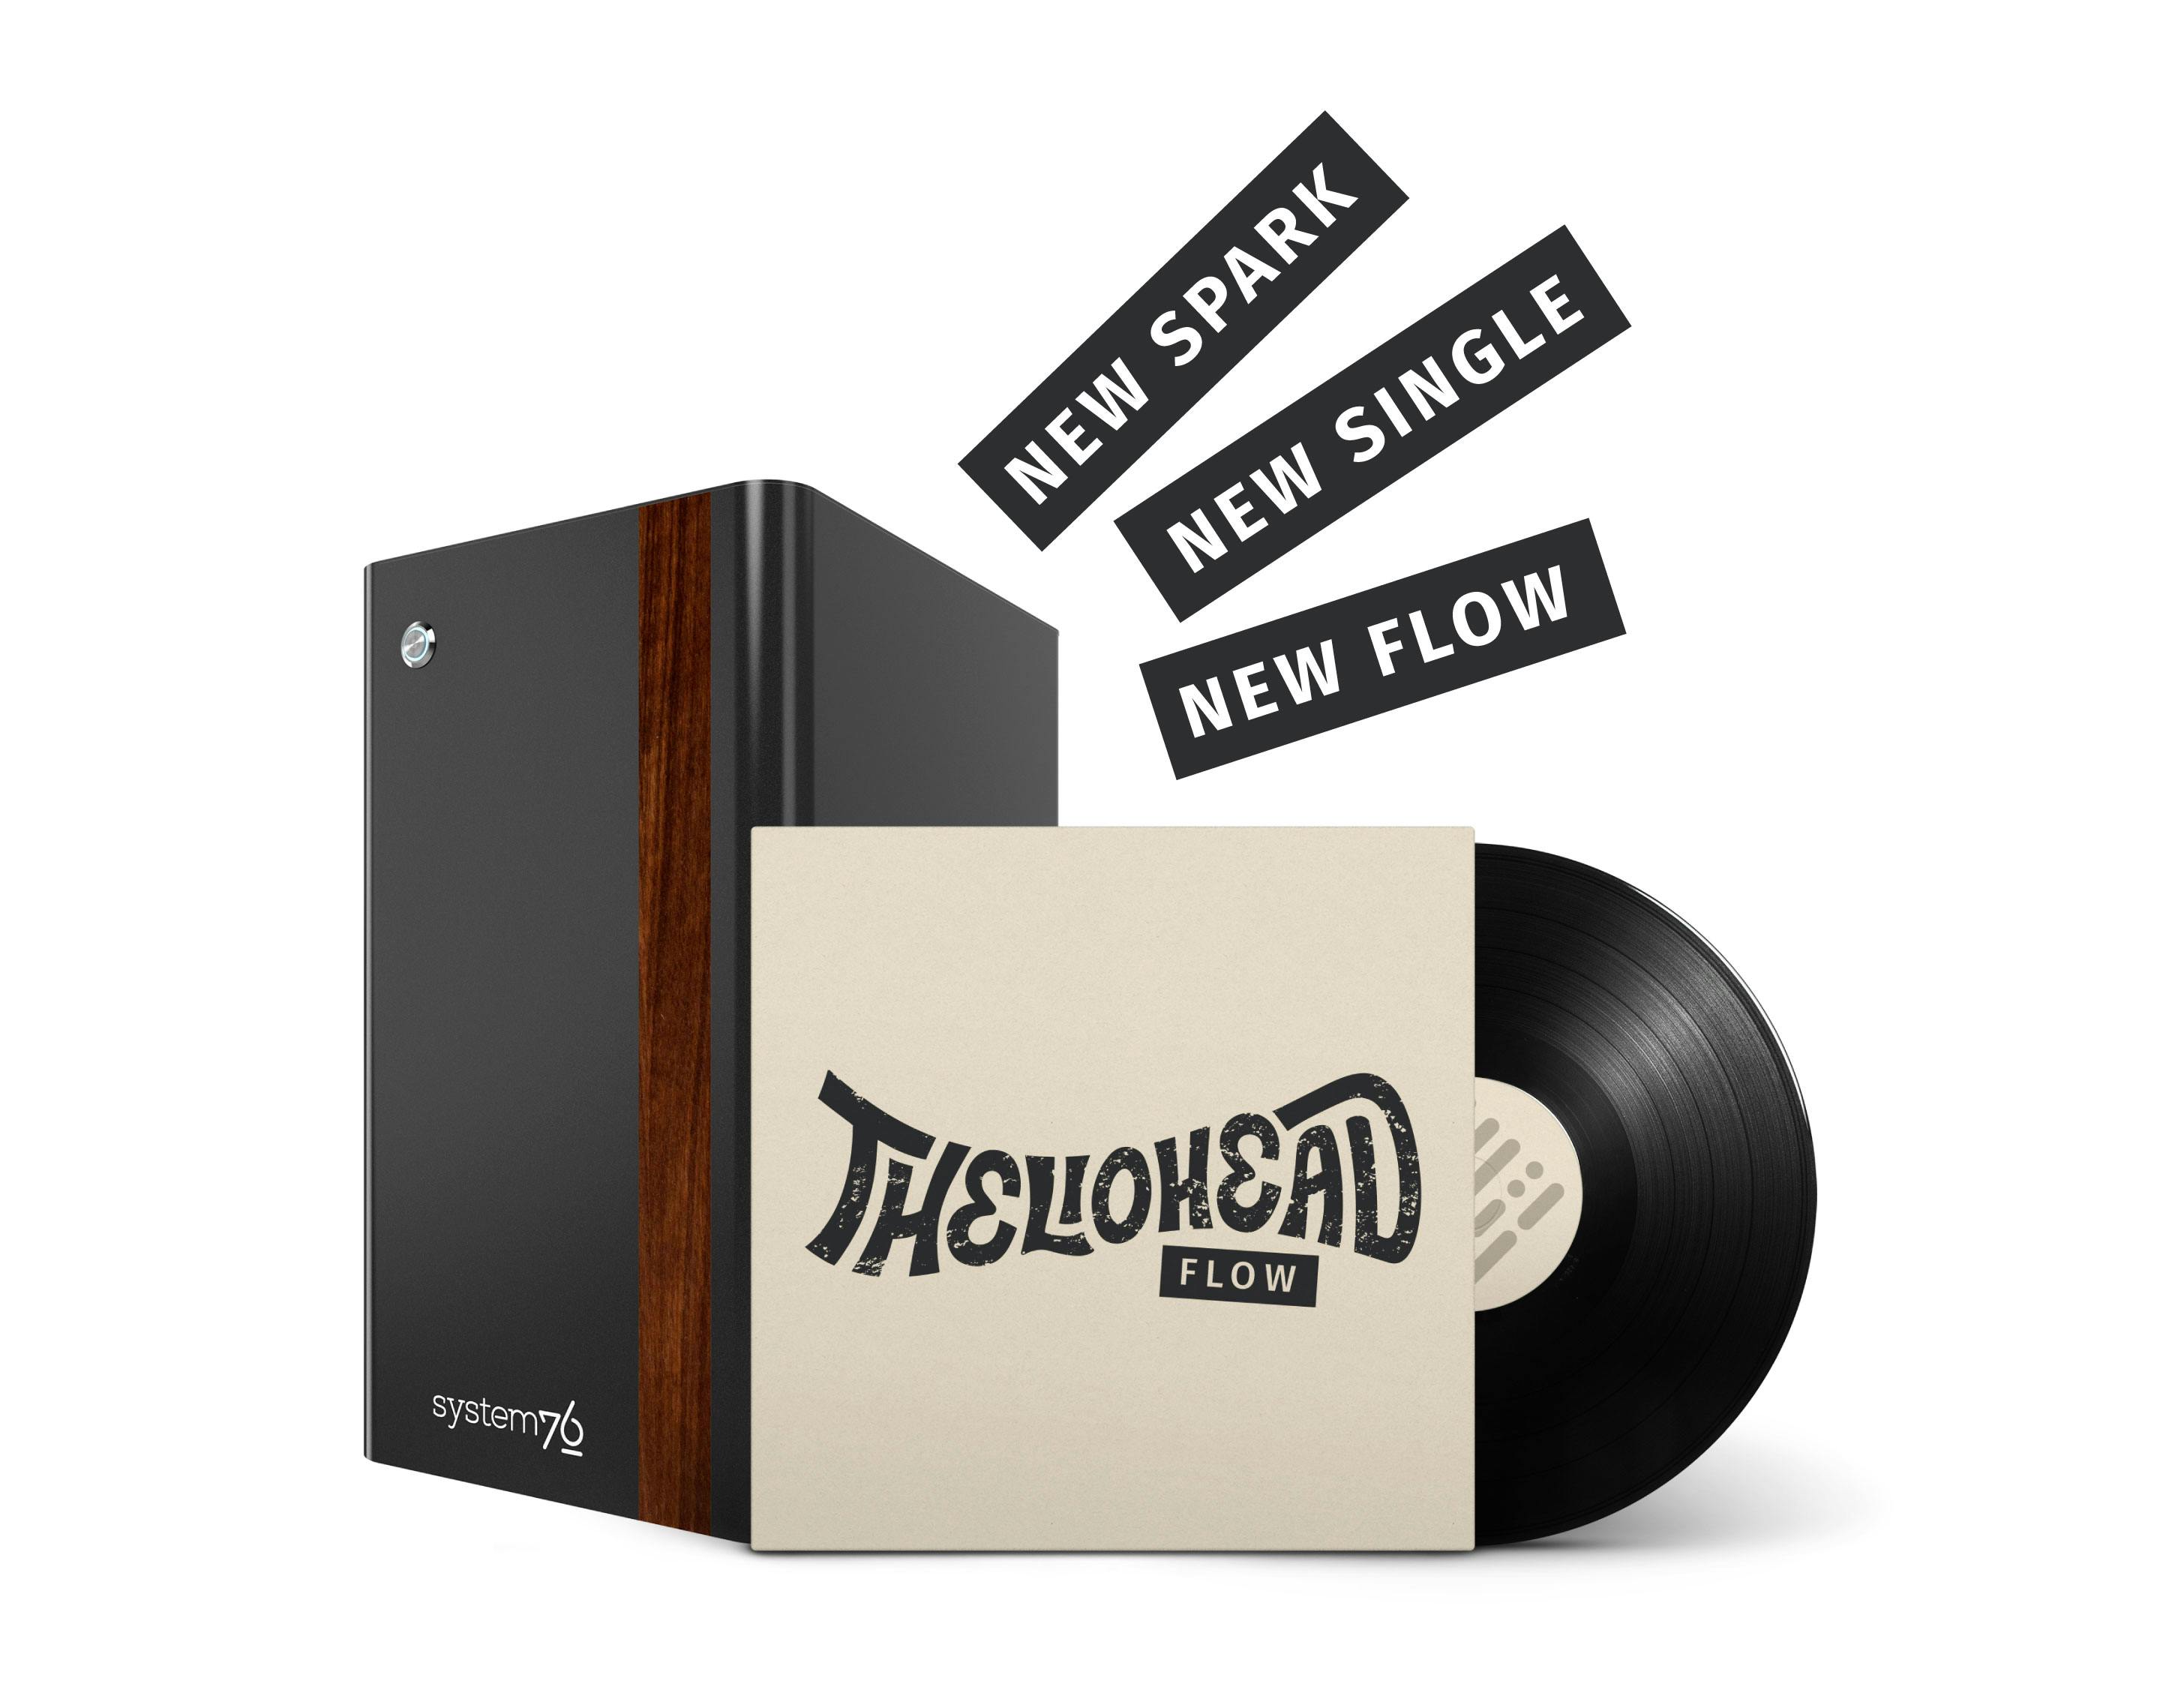 THELIOHEAD viynal album with logo sits in front of Thelio Mira computer with walnut accent. Text above reads "New Spark, New Single, New Flow".